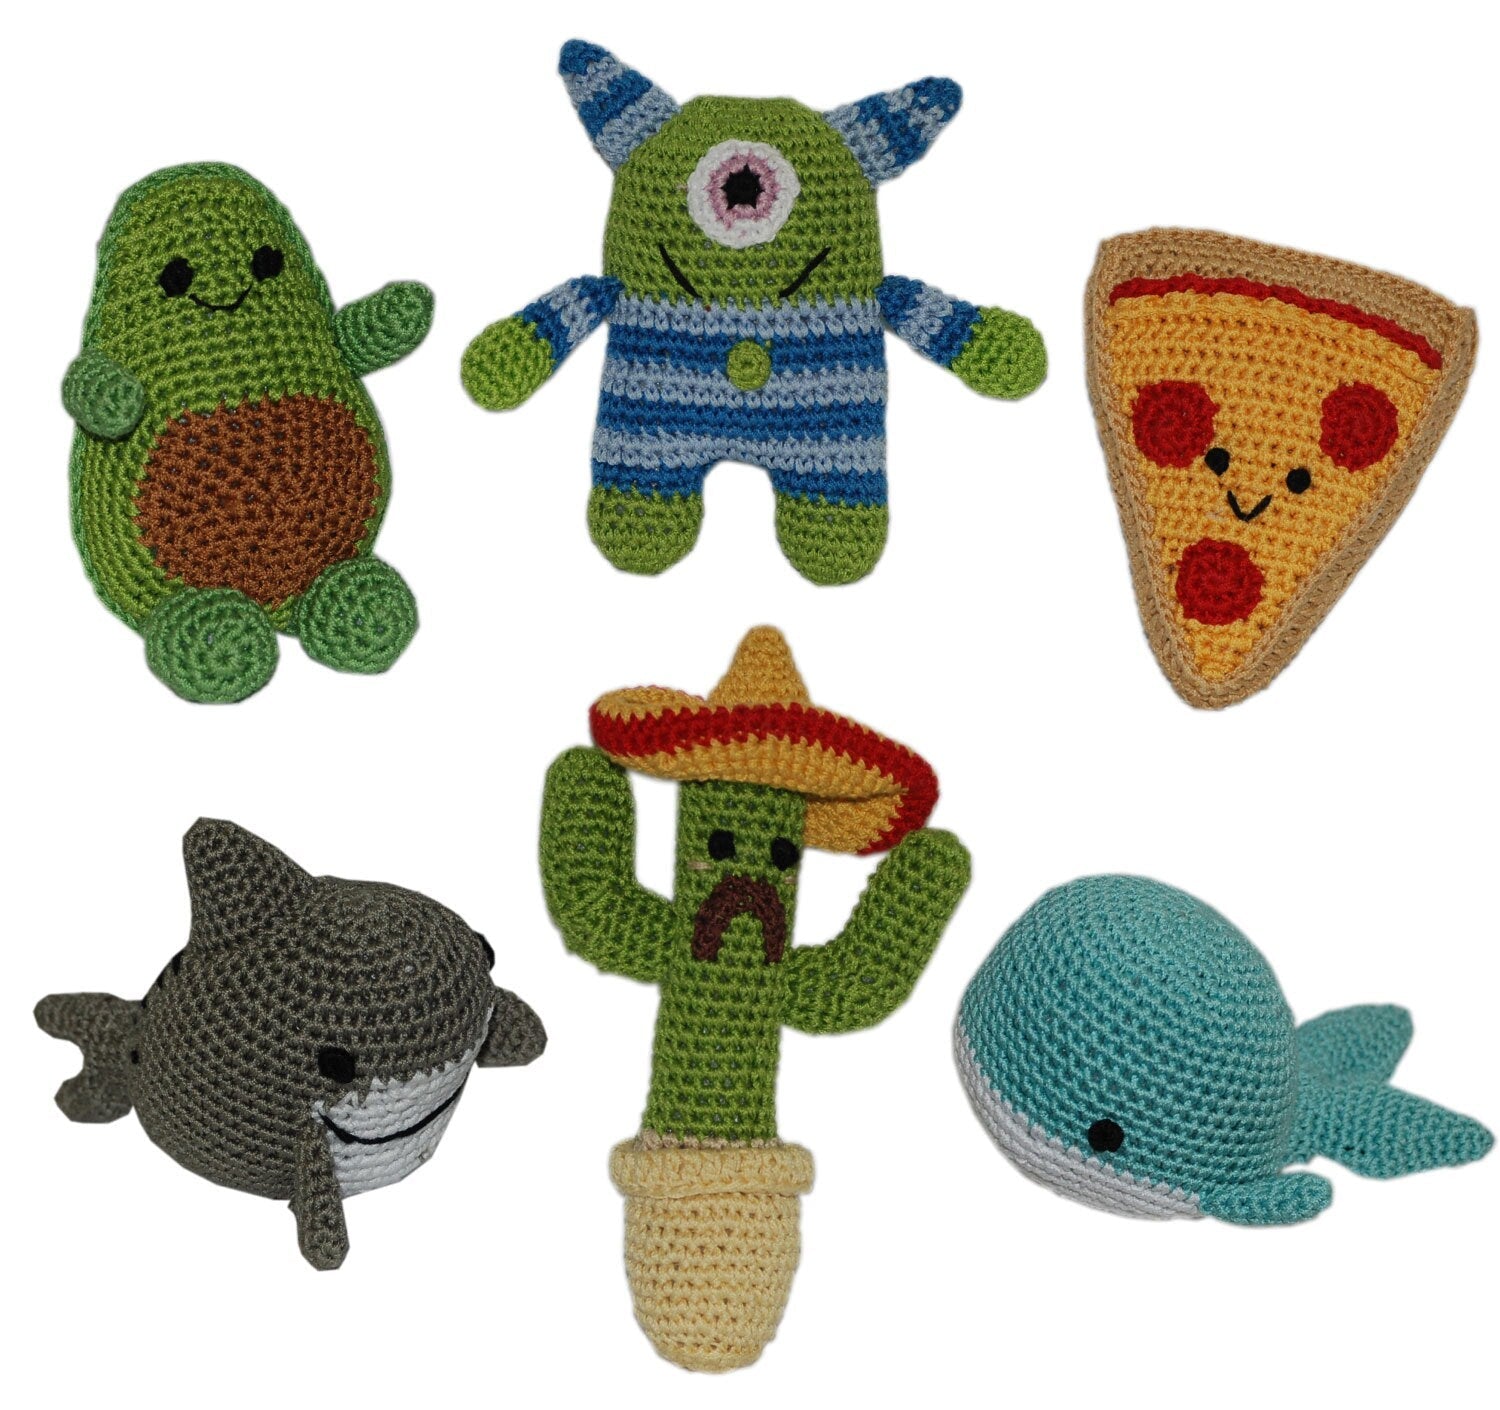 Knit Knacks Organic Cotton Pet & Dog Toys, (Choose from: Pizza, Avocado, Monster, Shark, Whale or Cactus)-0